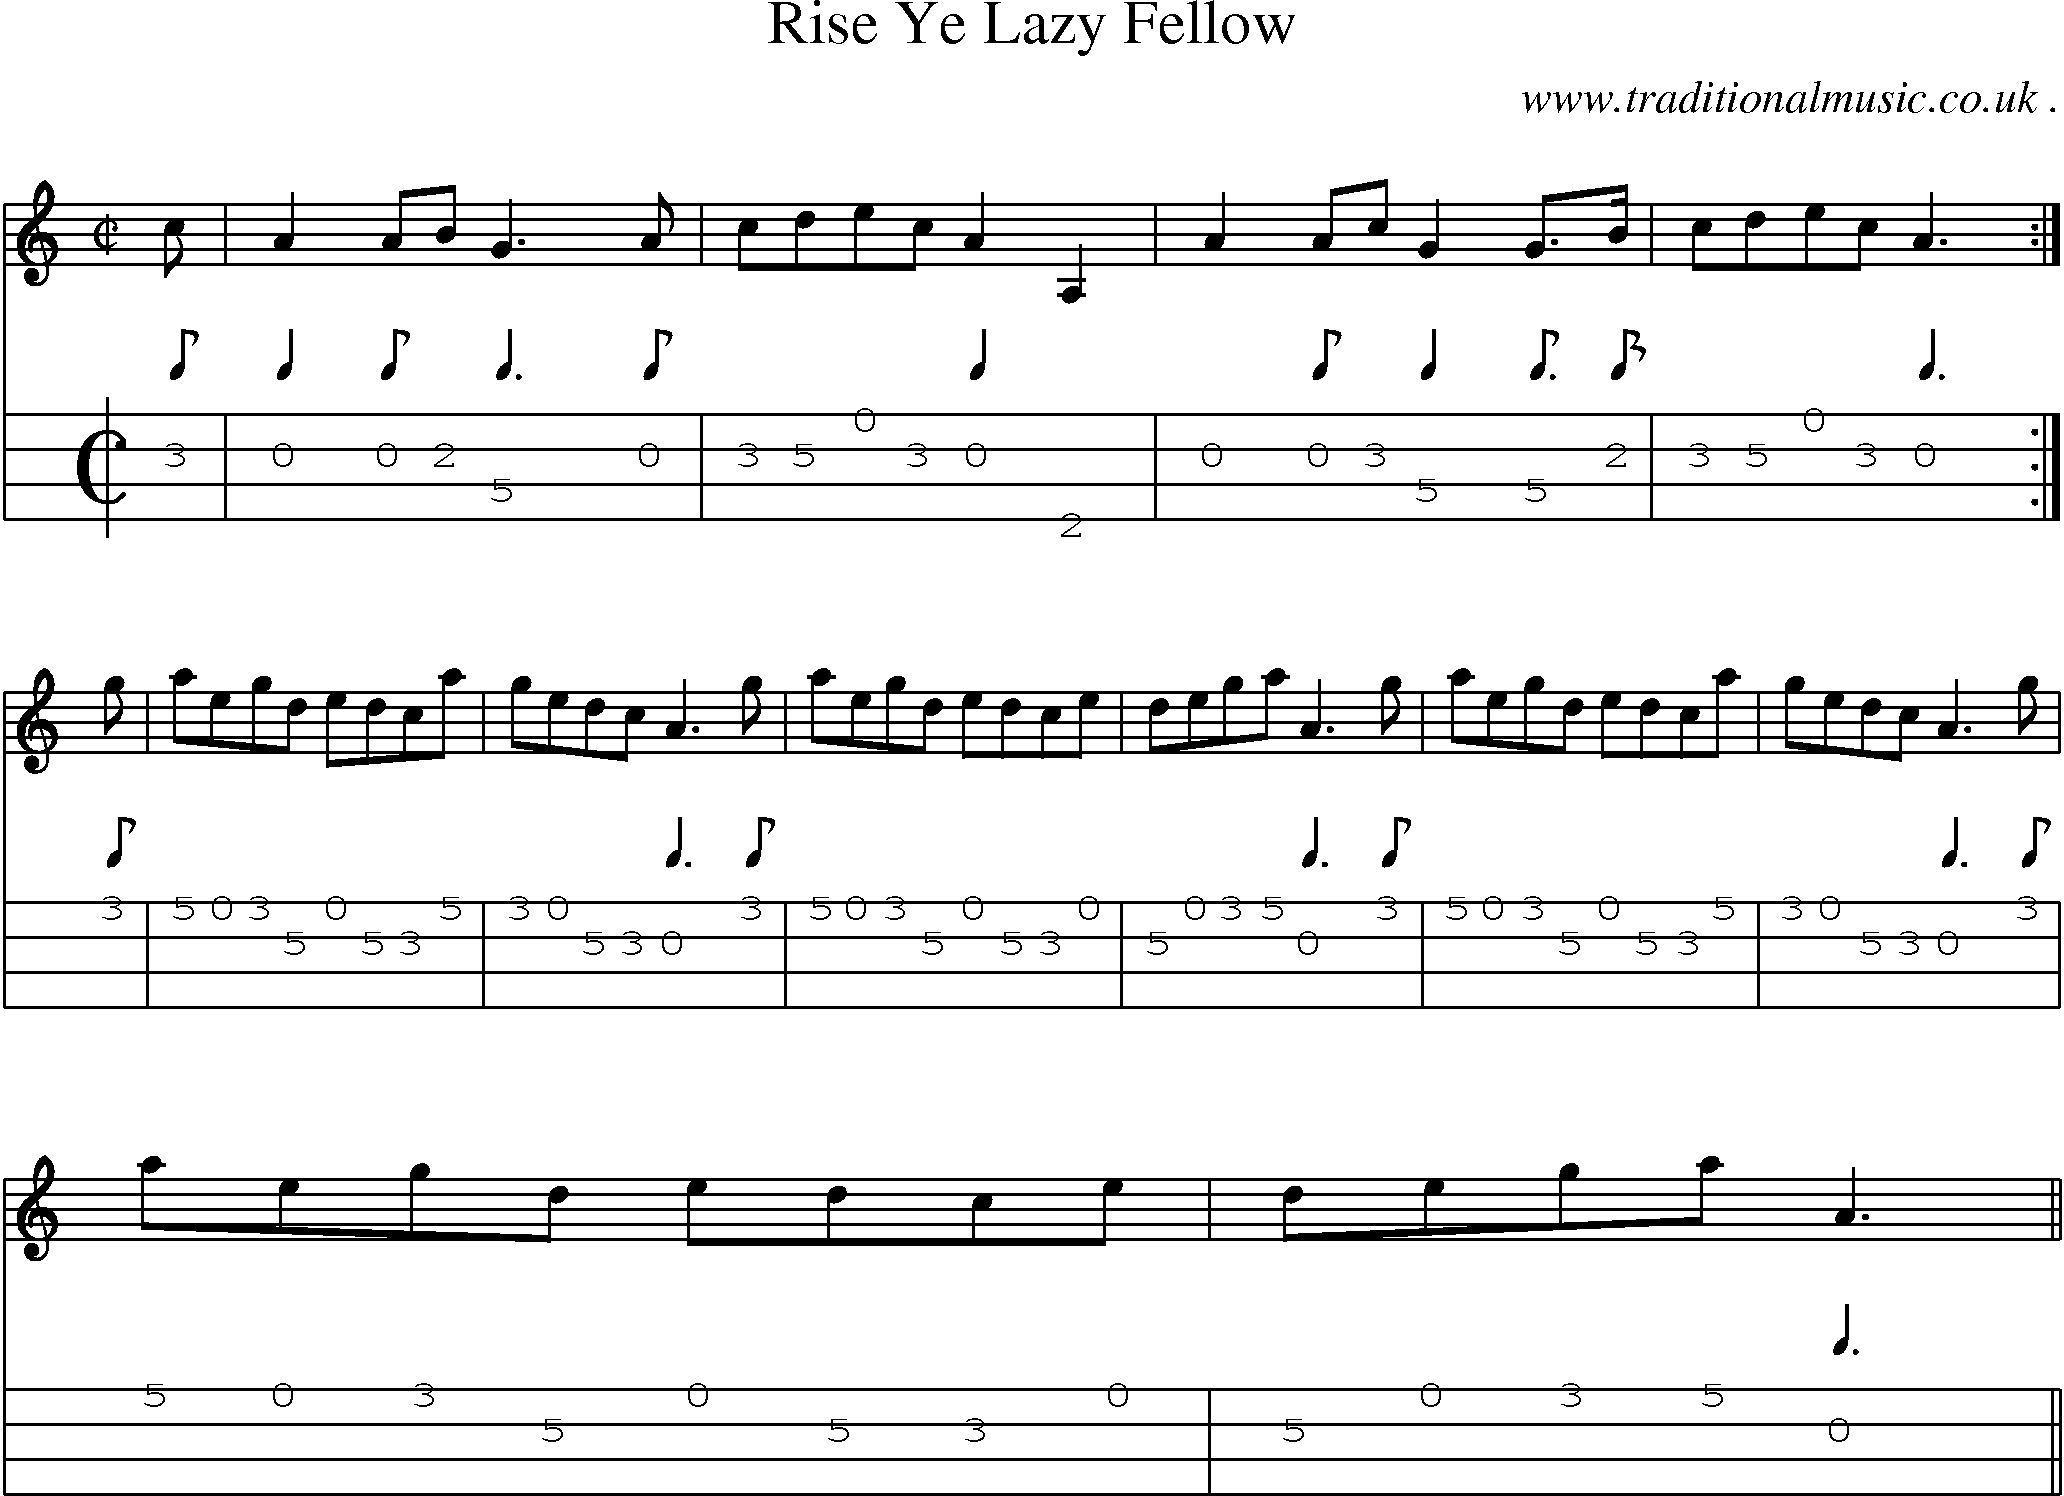 Sheet-music  score, Chords and Mandolin Tabs for Rise Ye Lazy Fellow